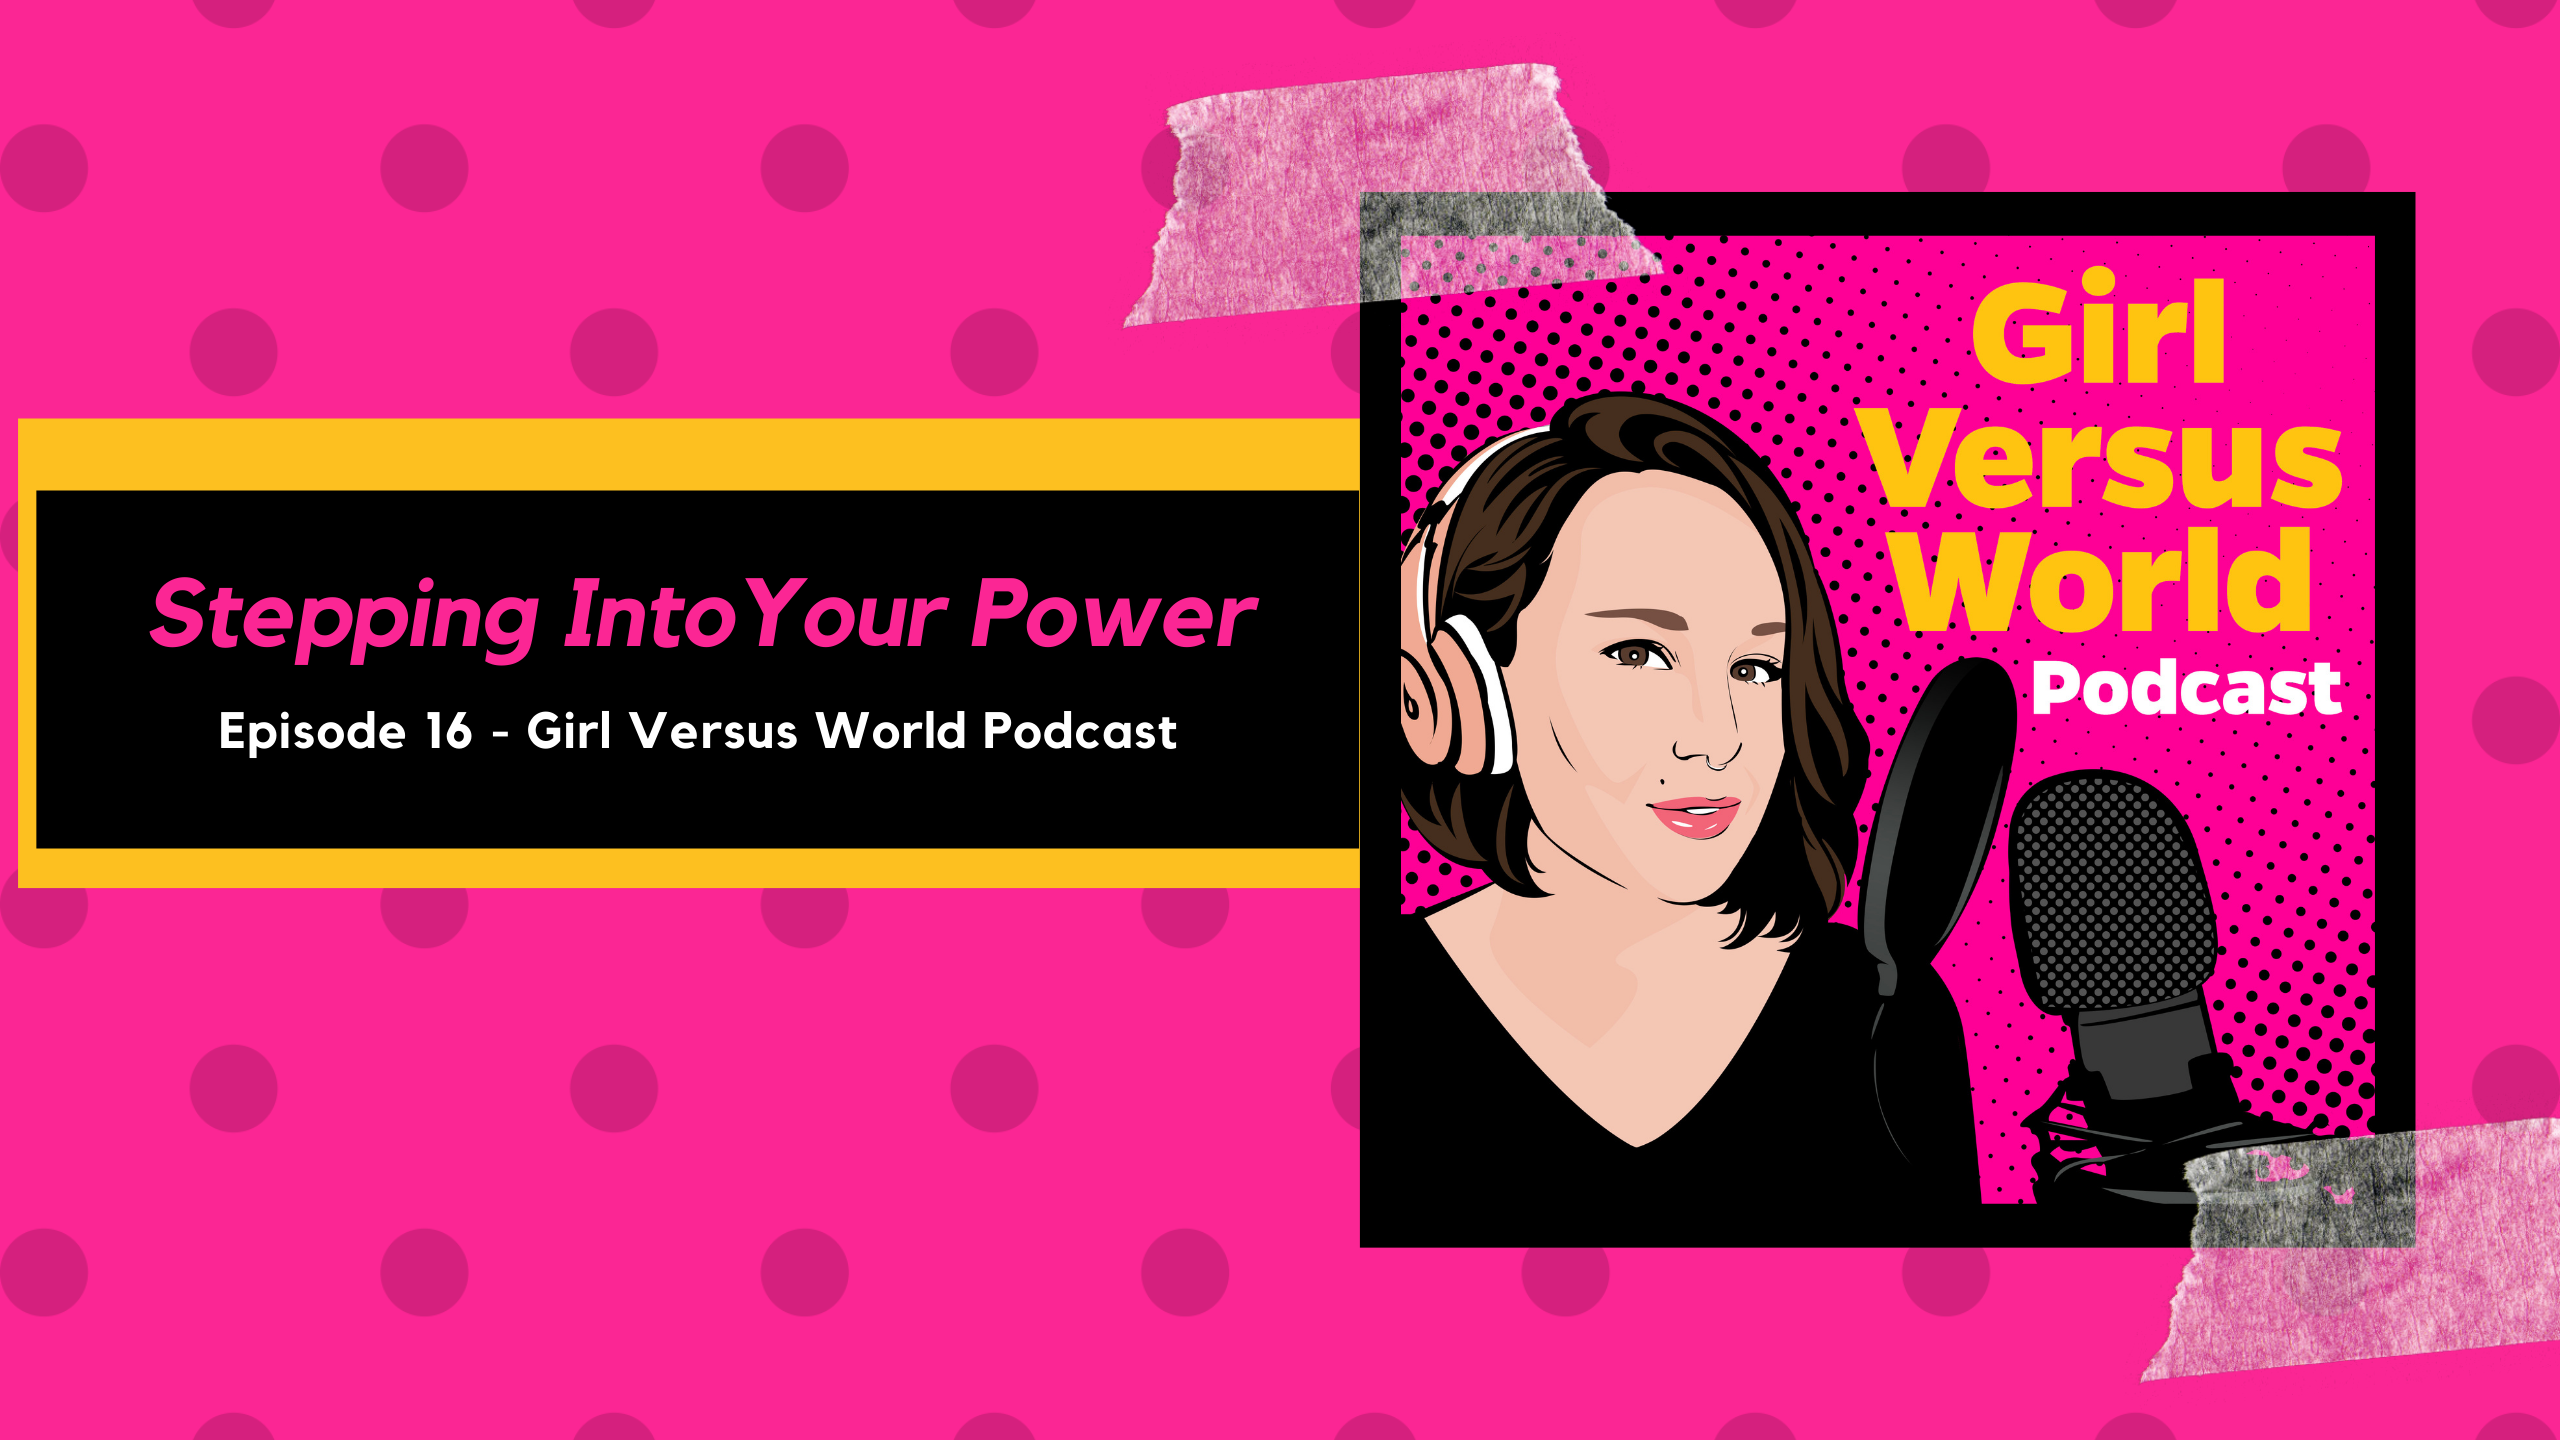 Podcast Episode 16: Stepping Into Your Own Power